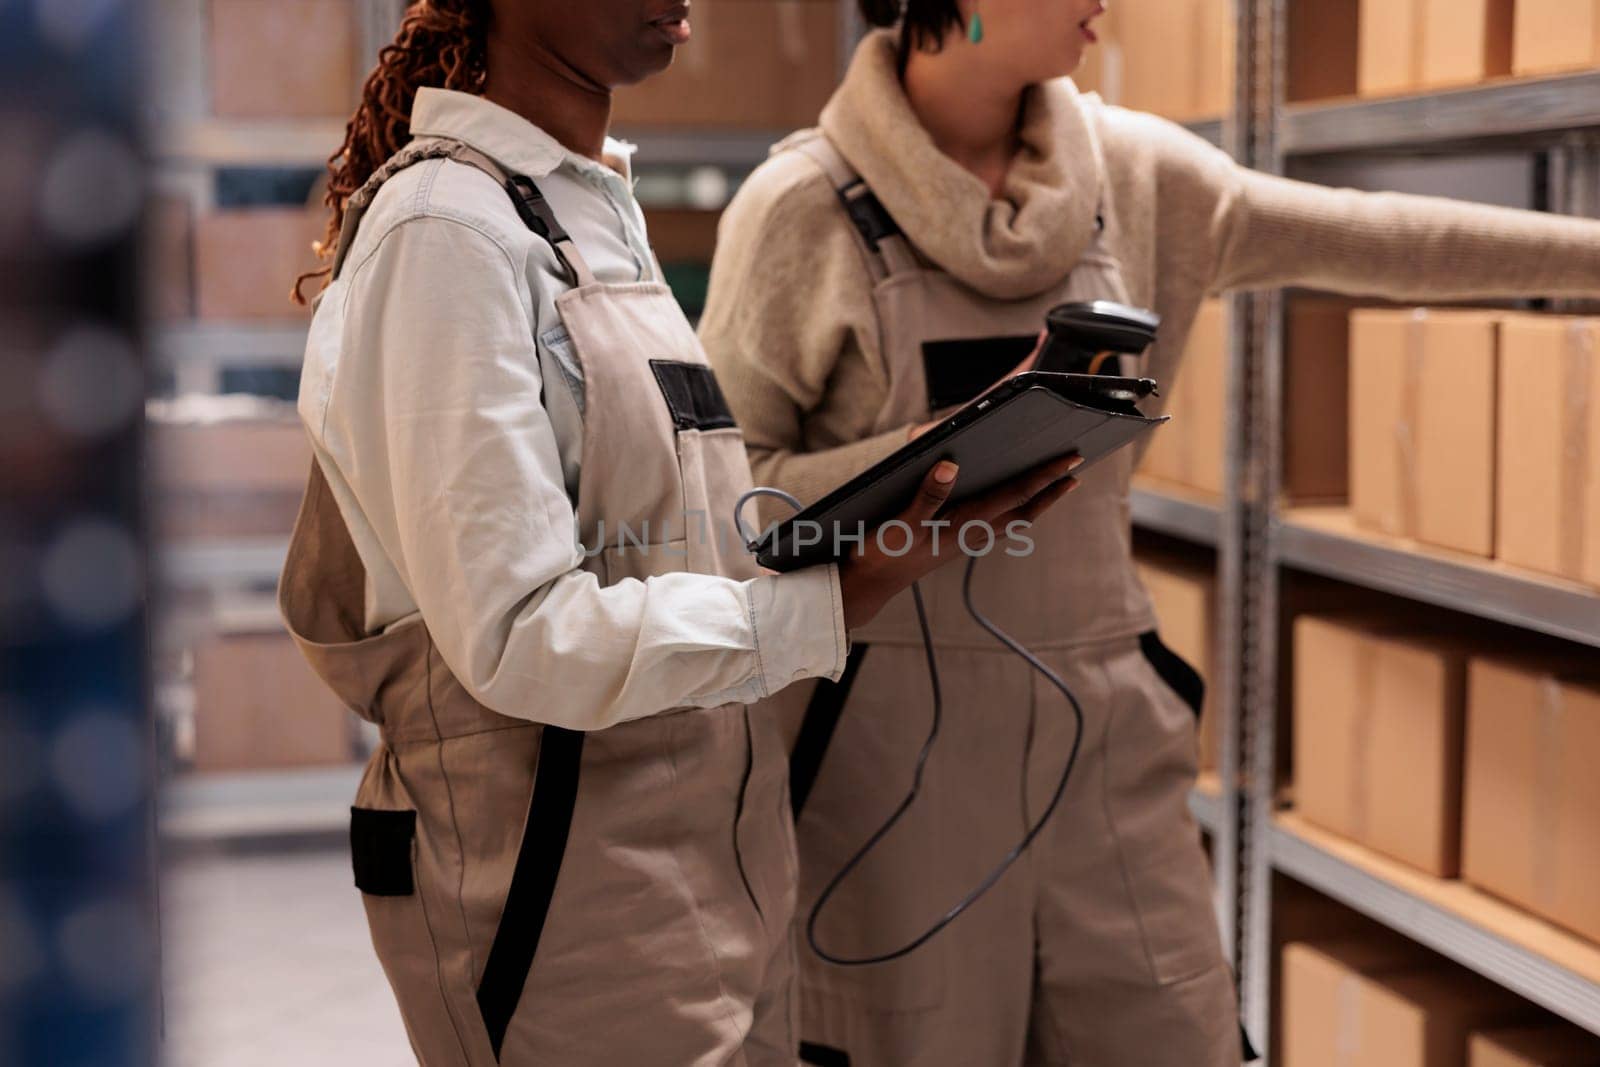 Retail warehouse managers scanning cardboard box on shelf by DCStudio